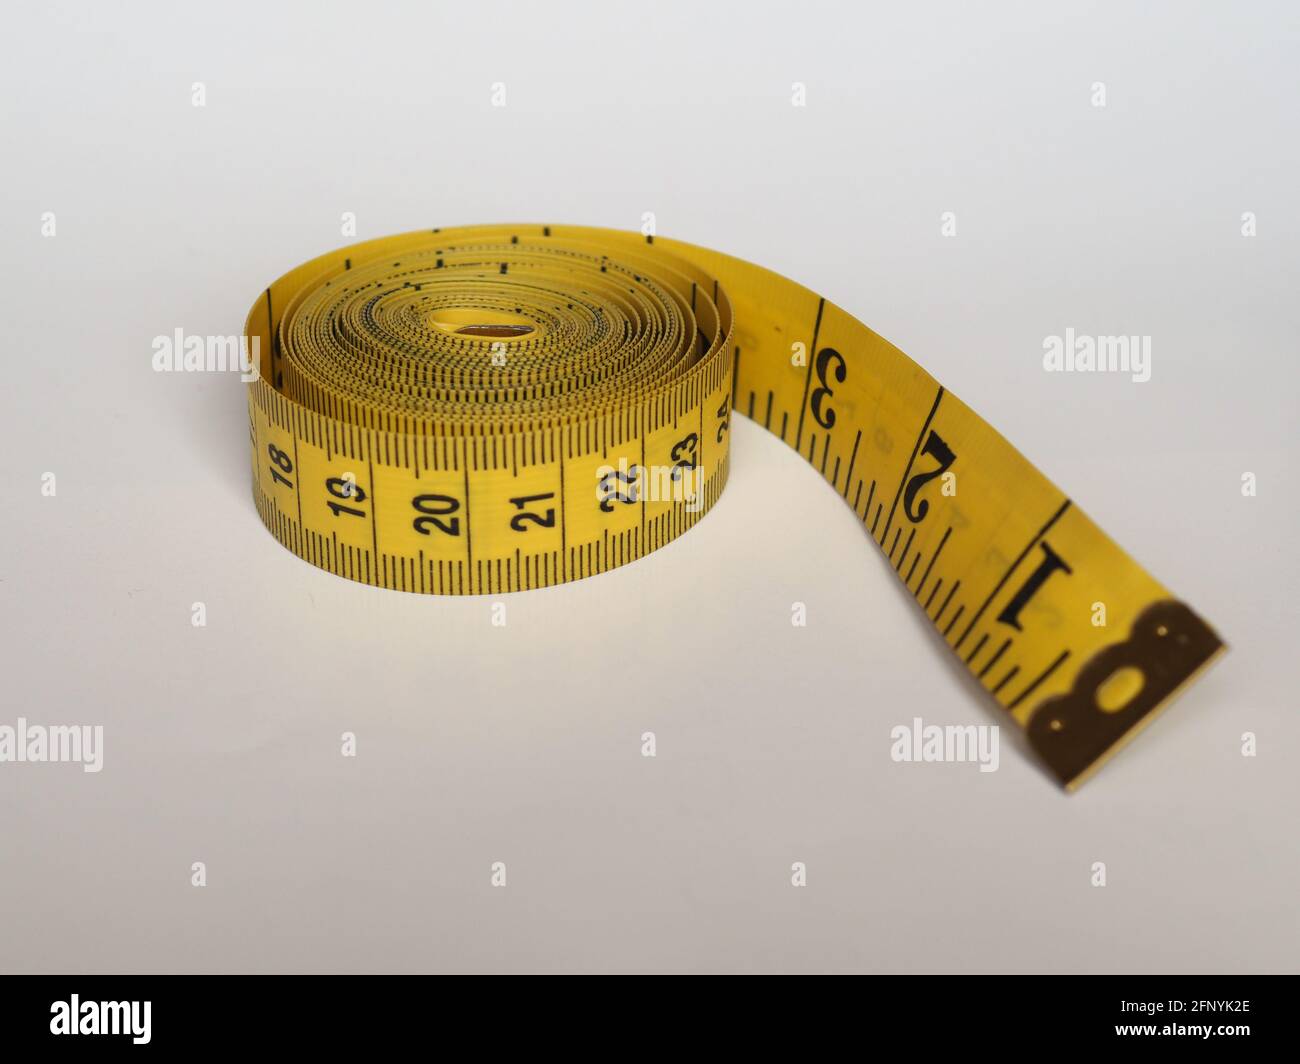 https://c8.alamy.com/comp/2FNYK2E/measuring-tape-flexible-ruler-ribbon-for-tailoring-with-both-imperial-and-metric-units-2FNYK2E.jpg